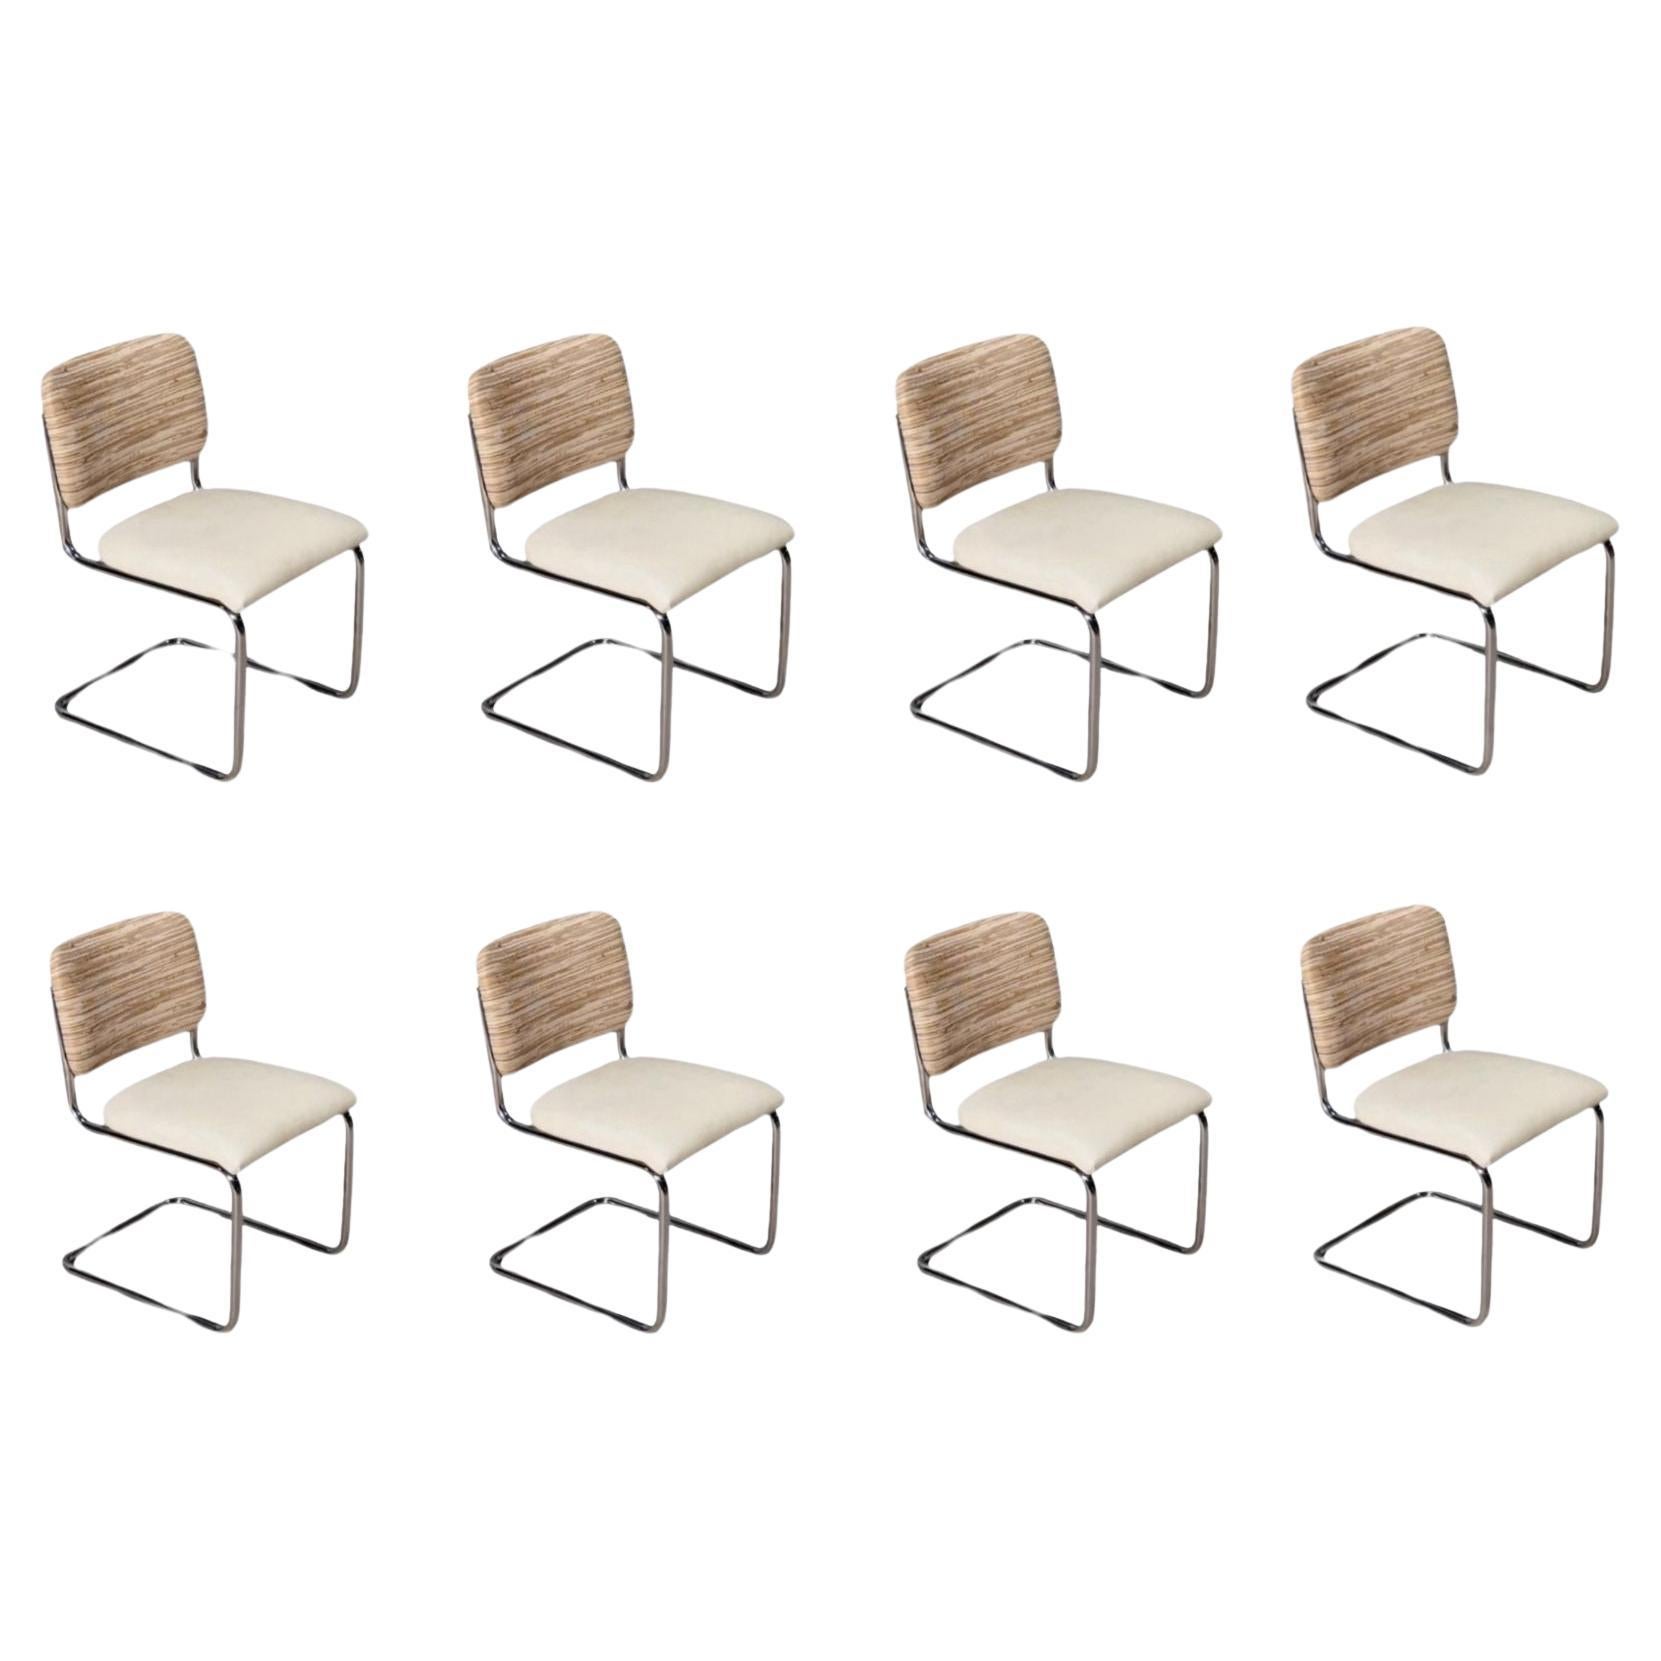 8 Marcel Breuer Cesca Woven Leather Side/Dining Chairs, Knoll 1980